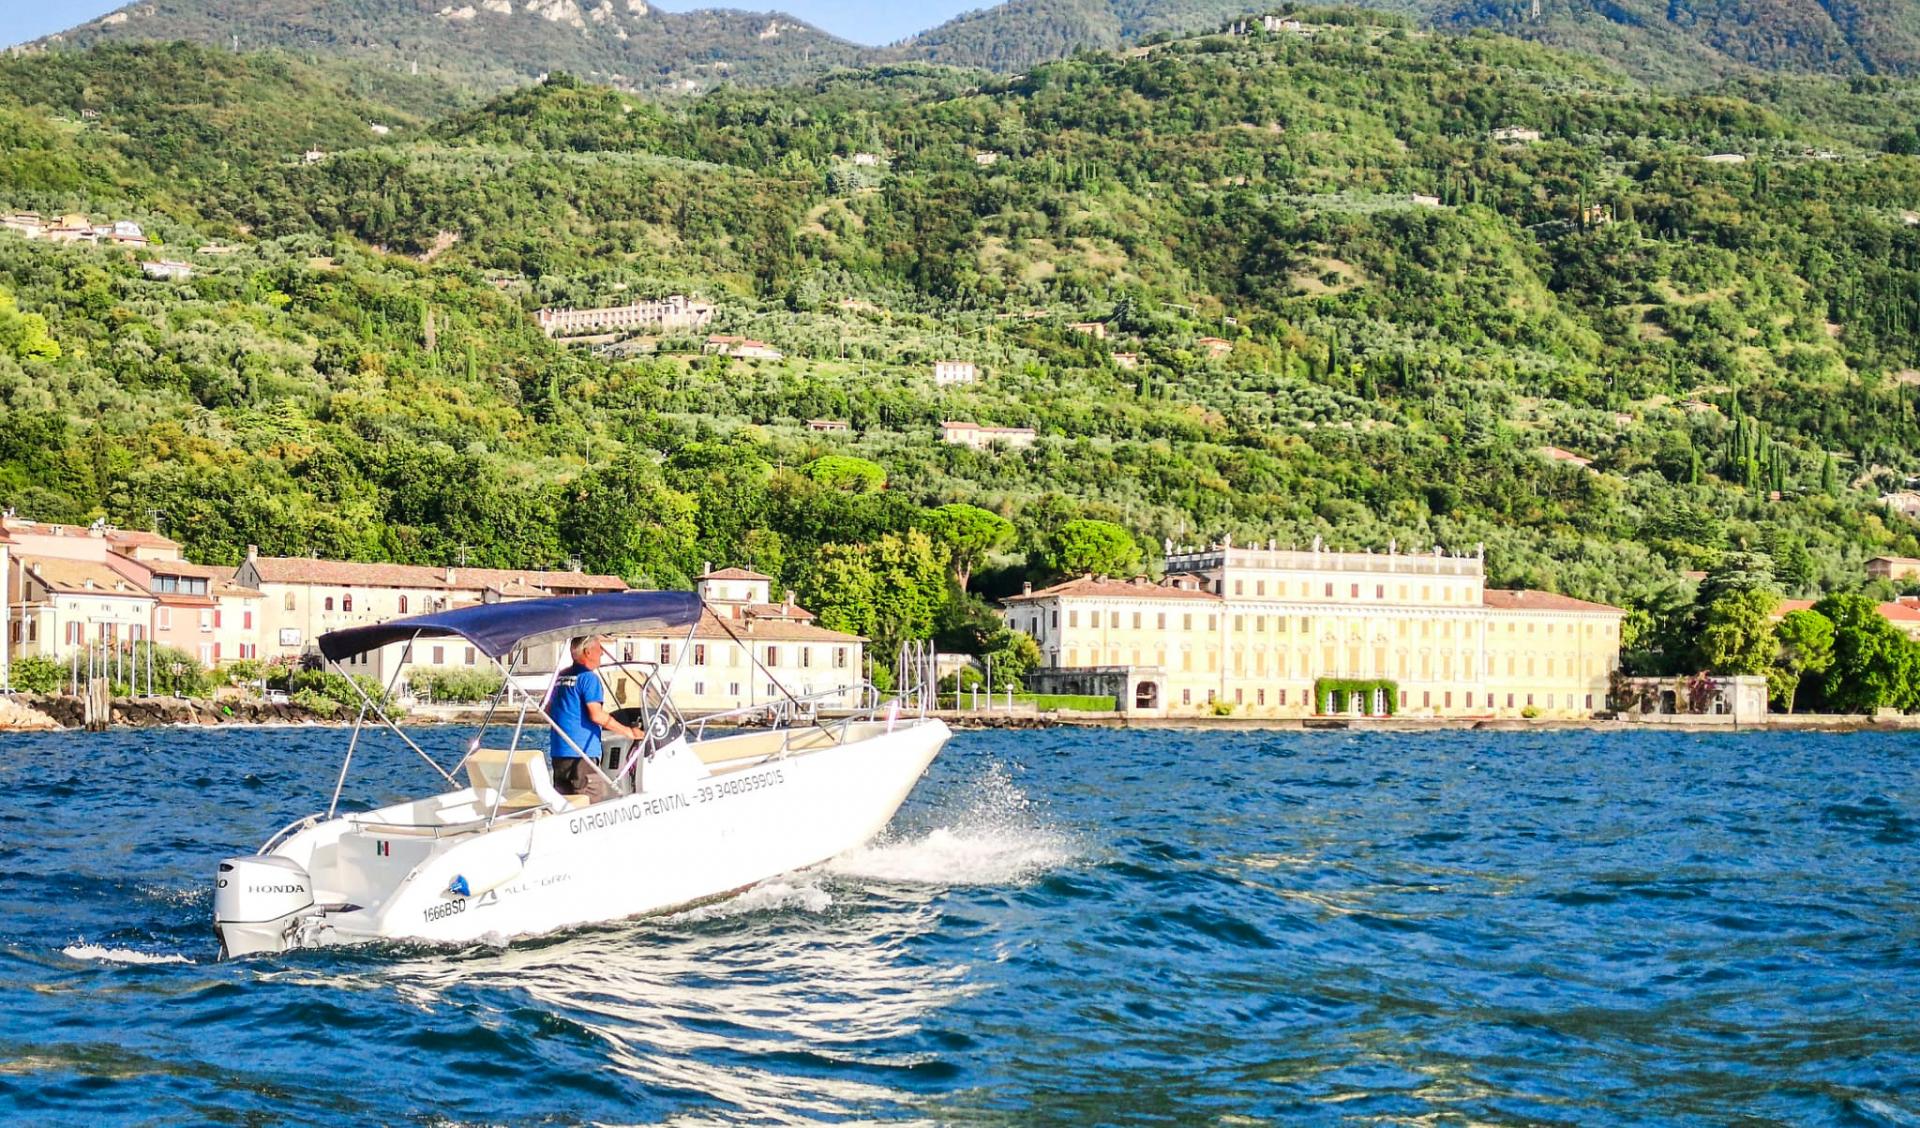 What to see with a rental boat on Lake Garda